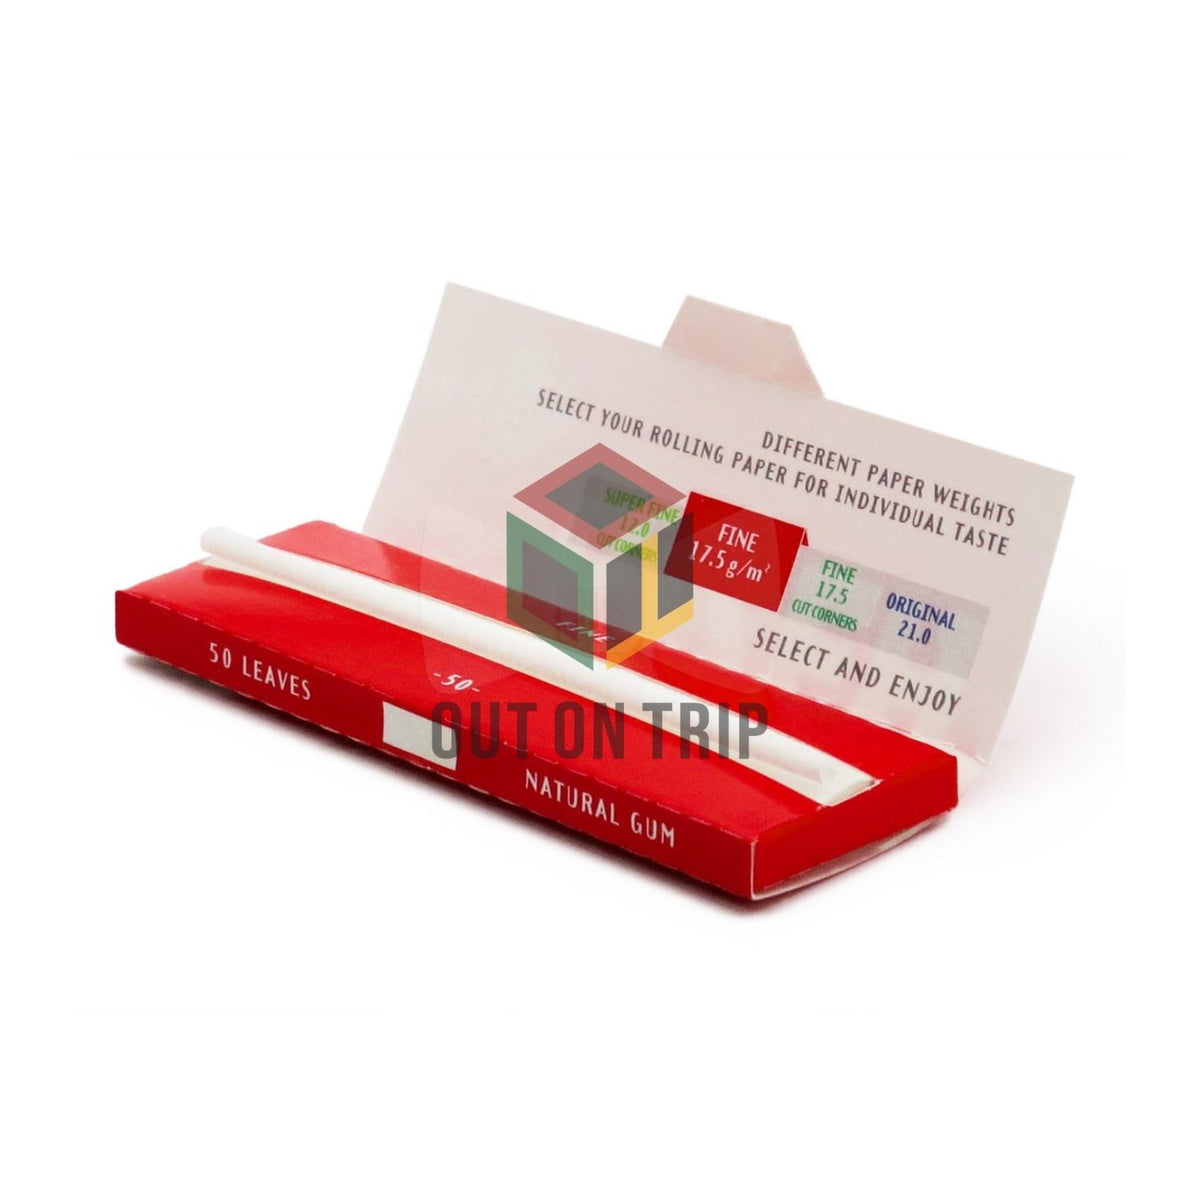 GIZEH Fine Red Rolling Paper Regular Size - 50 Leaves